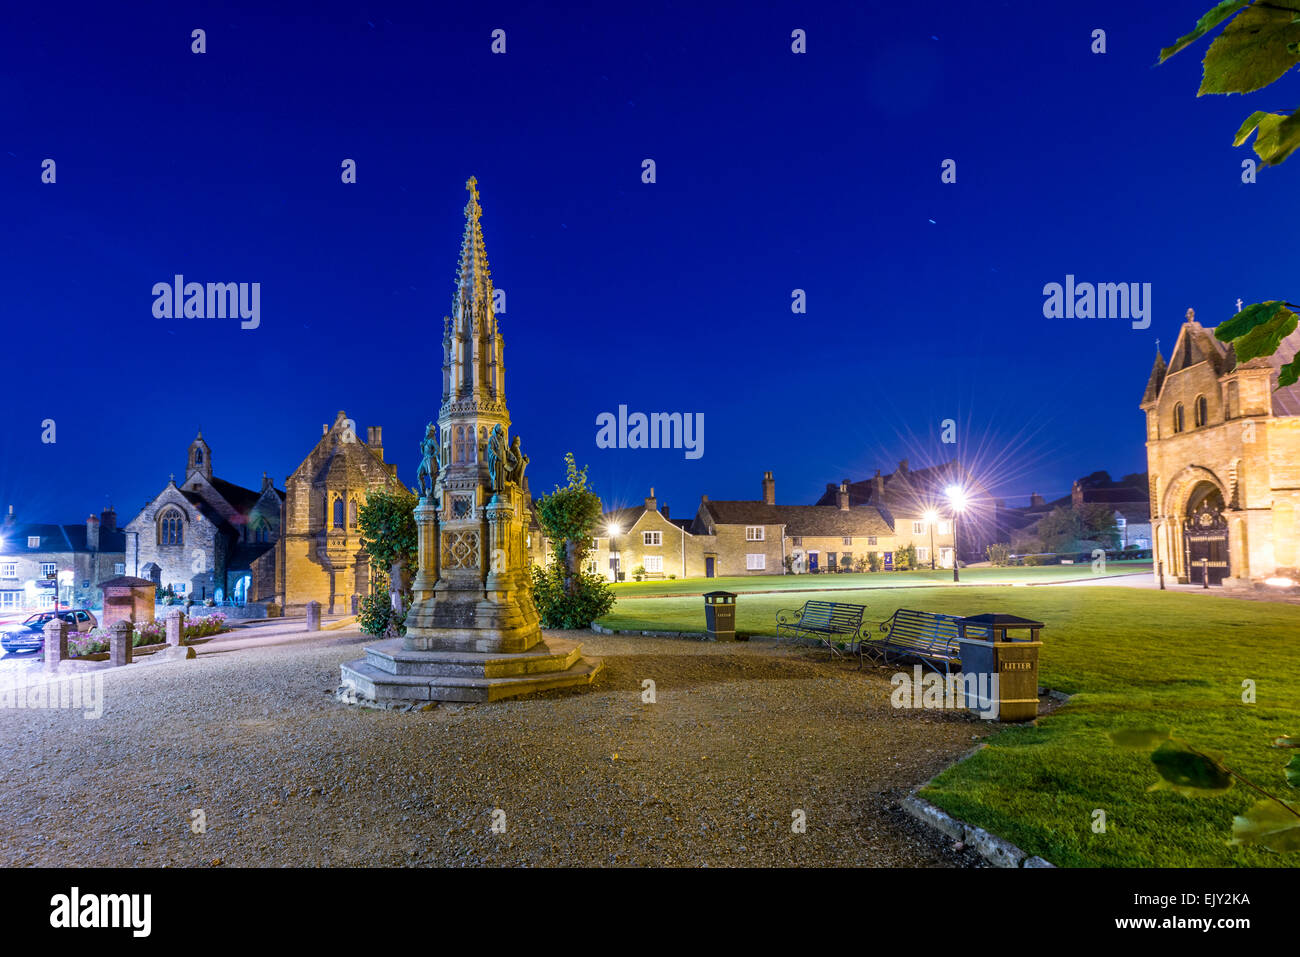 Sherborne Abbey, Dorset UK seen at night. Formally known as the Abbey Church of St Mary the Virgin. Stock Photo